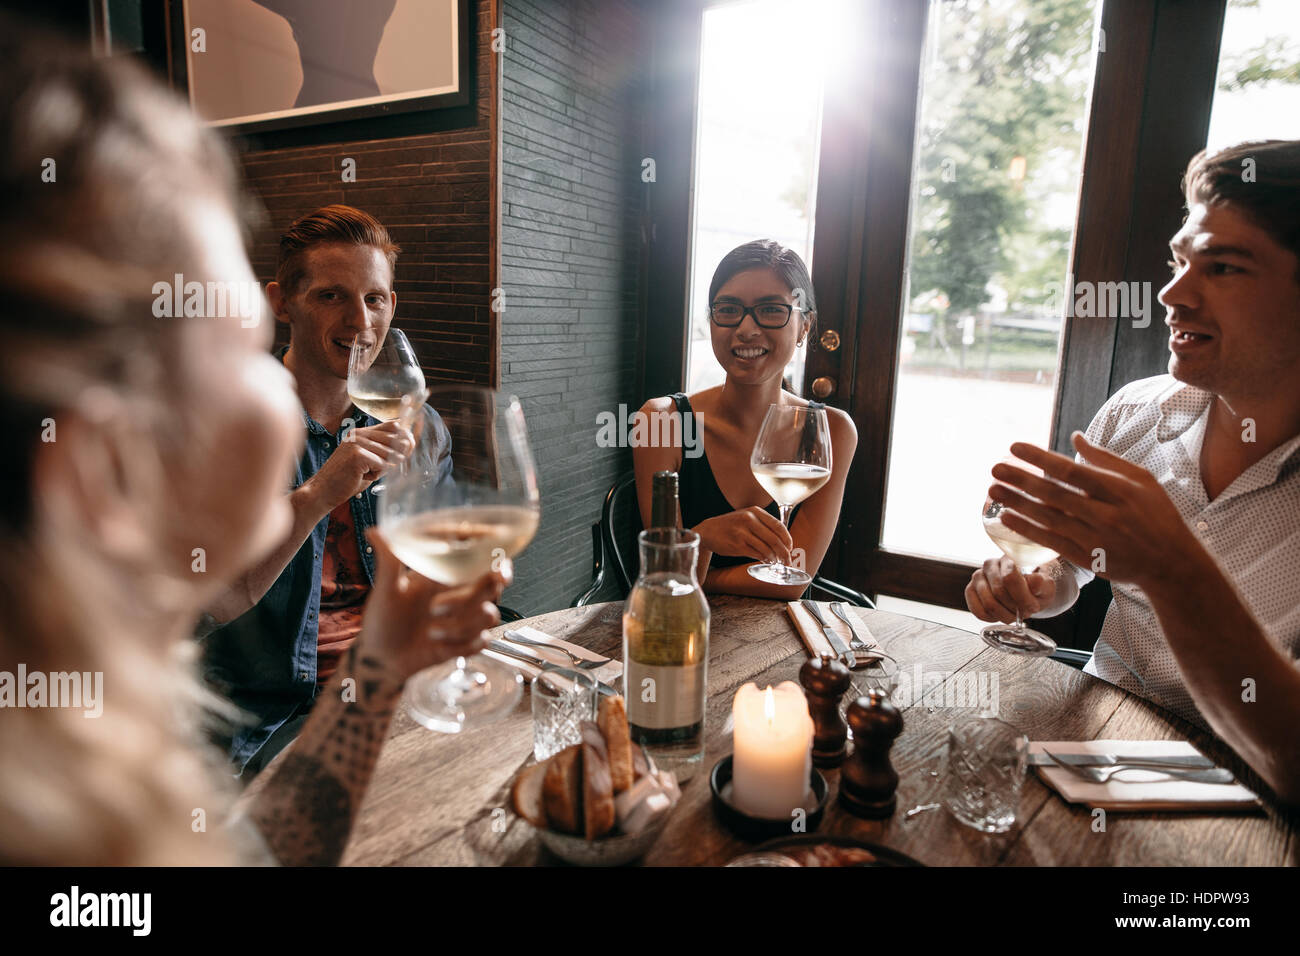 Indoor shot of young friends drinking wine at cafe. Group of men and women enjoying a glass of wine at restaurant. Stock Photo